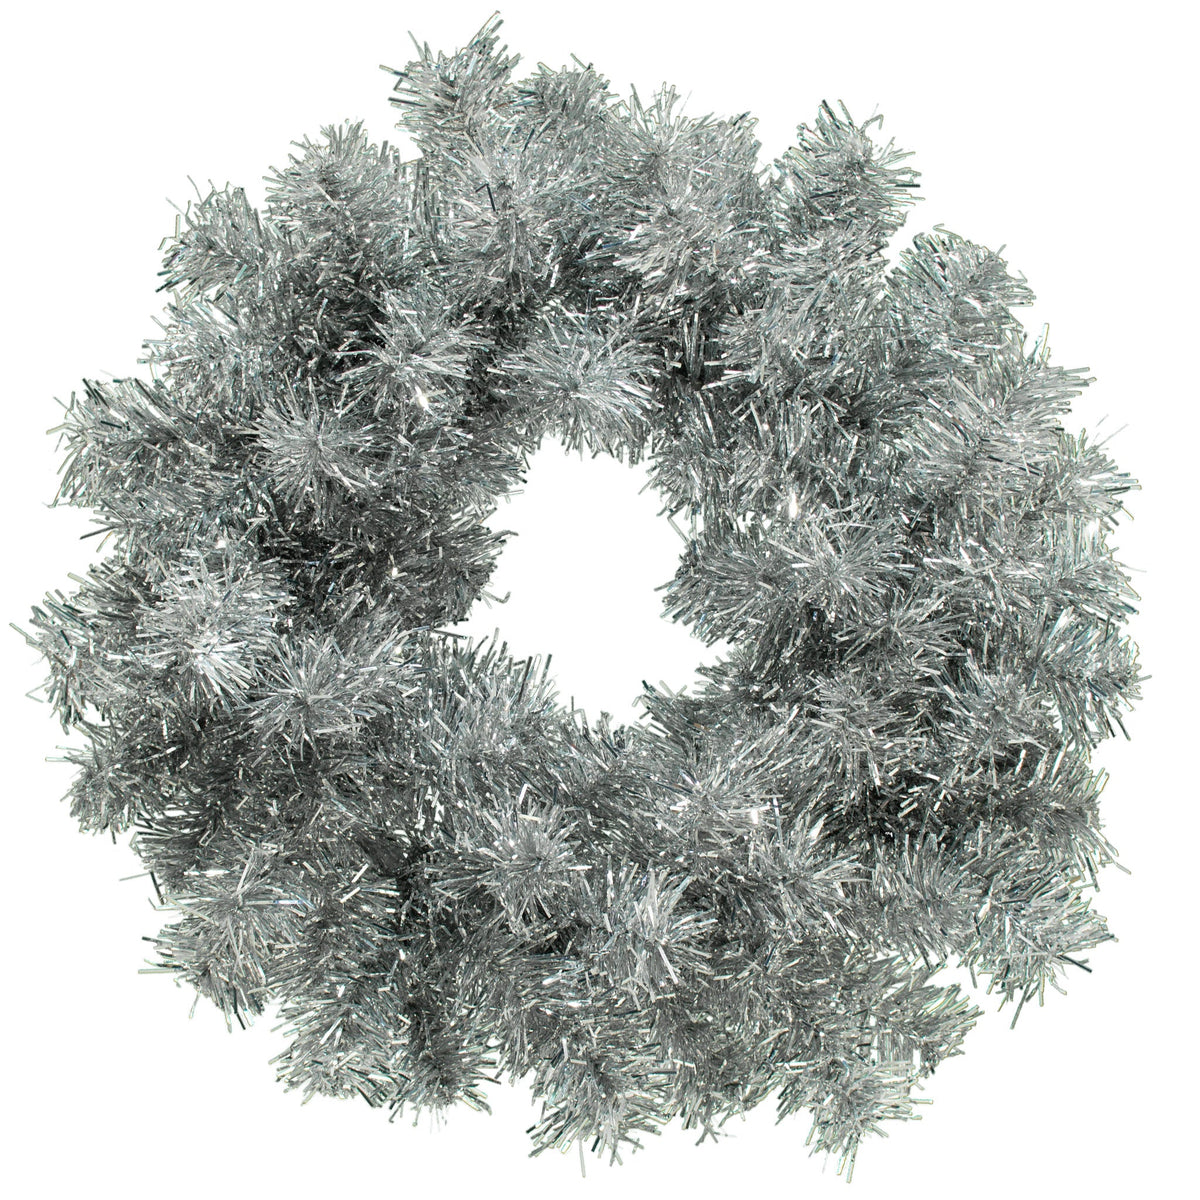 Tinsel wreaths can be shaped and decorated however you like.